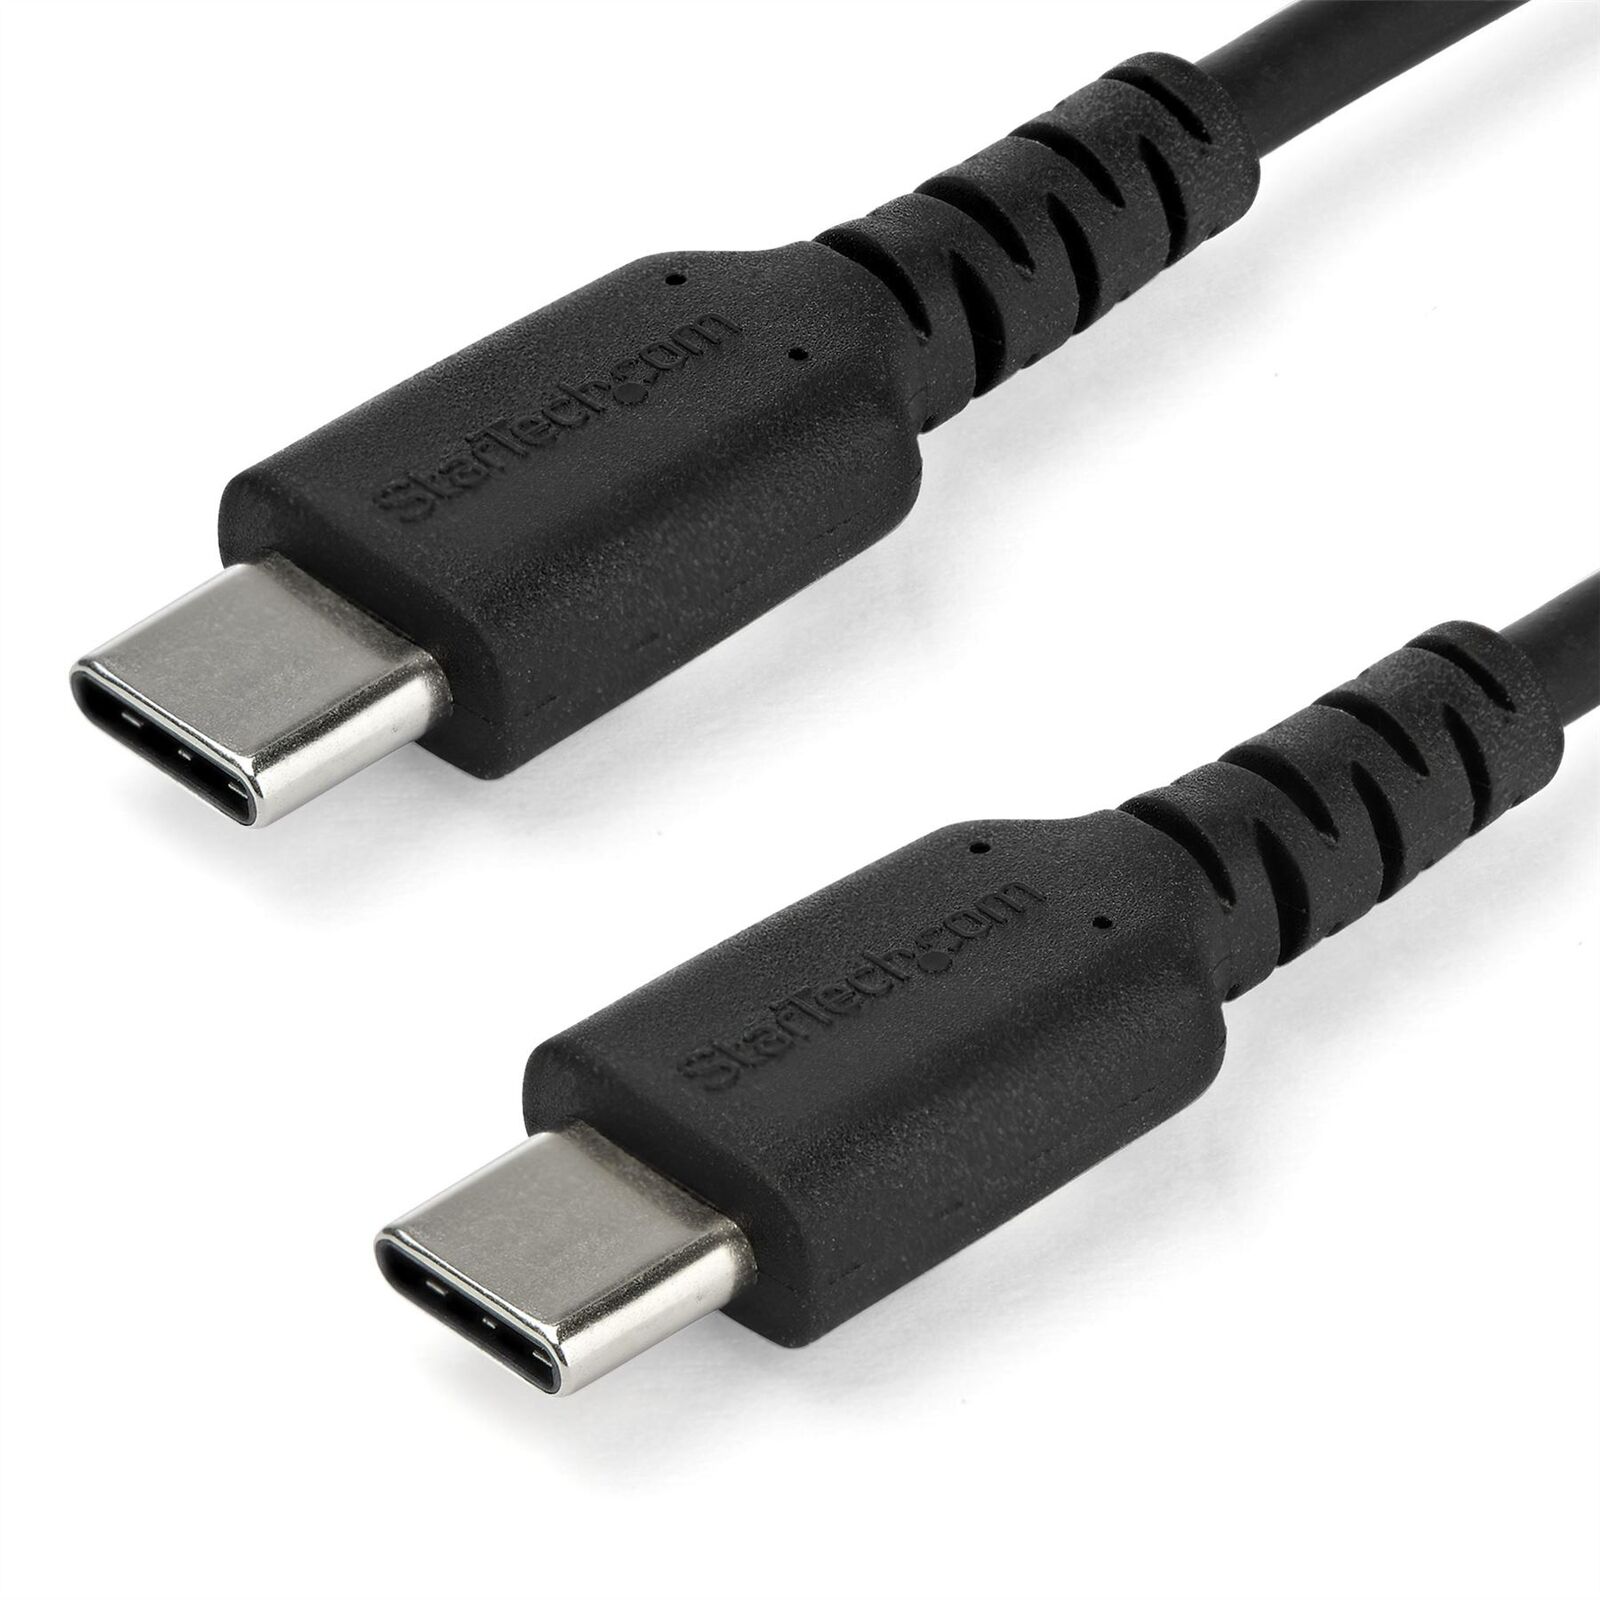 StarTech.com 1m USB C Charging Cable - Durable Fast Charge & Sync USB 2.0 Type C